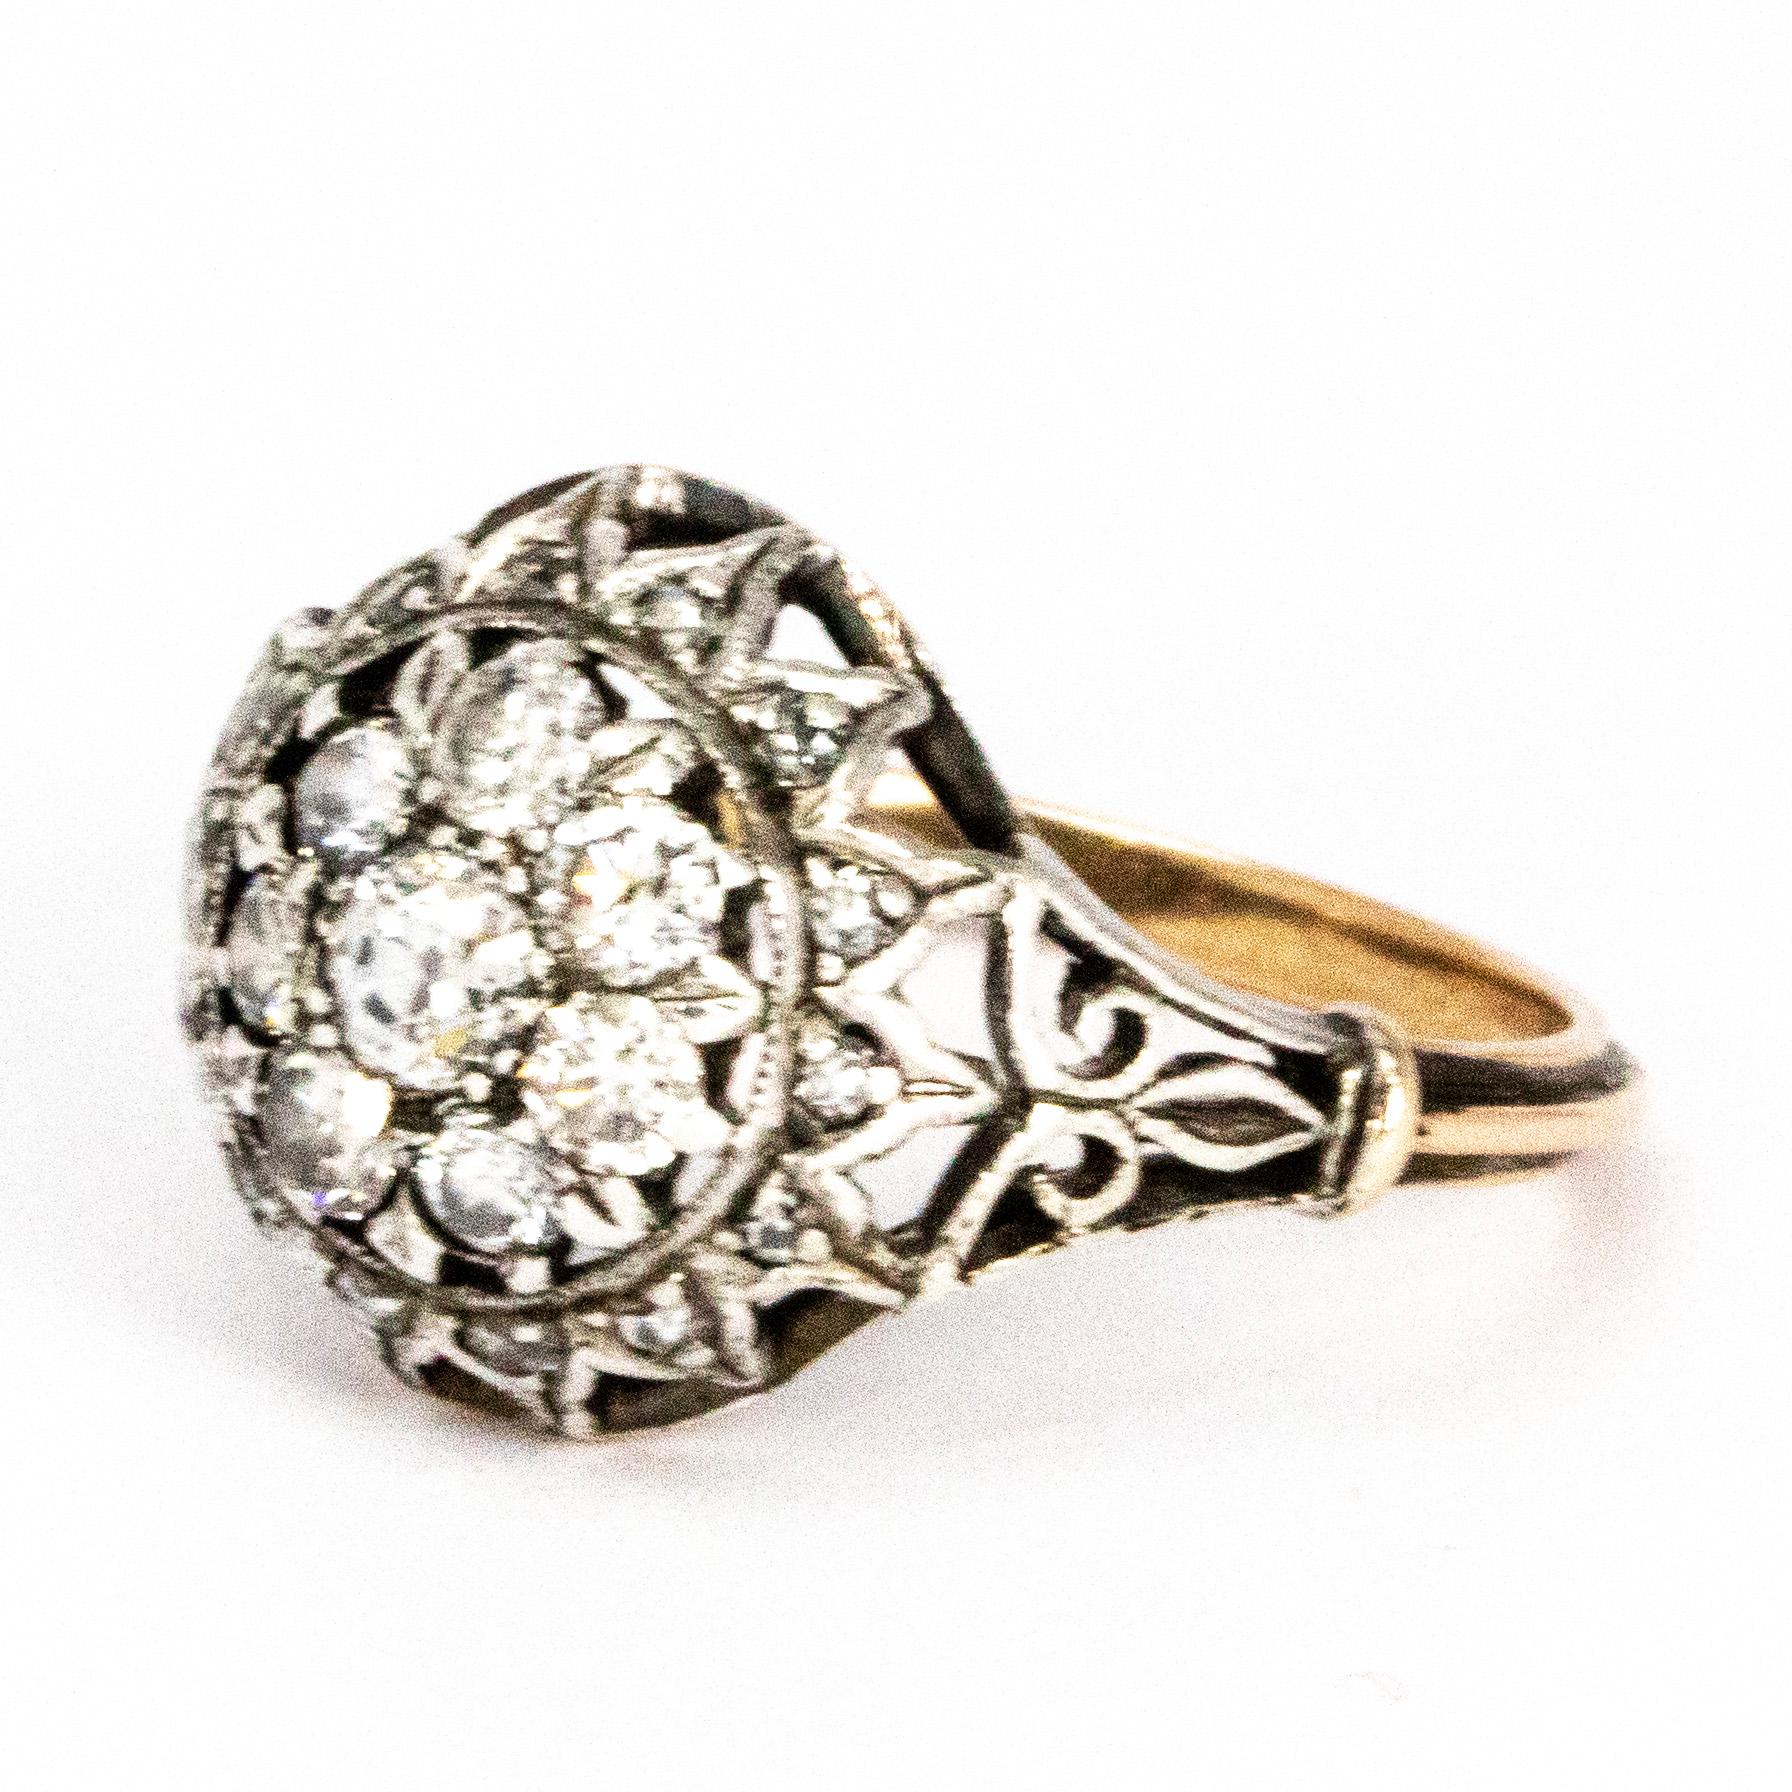 The intricate design of this ring is absolutely gorgeous. Its is adorned in diamonds and modelled in 18ct gold. The centre stone measures 20pts and the surrounding stones measure 7pts. Around the cluster there are diamond points also.

Ring Size: L